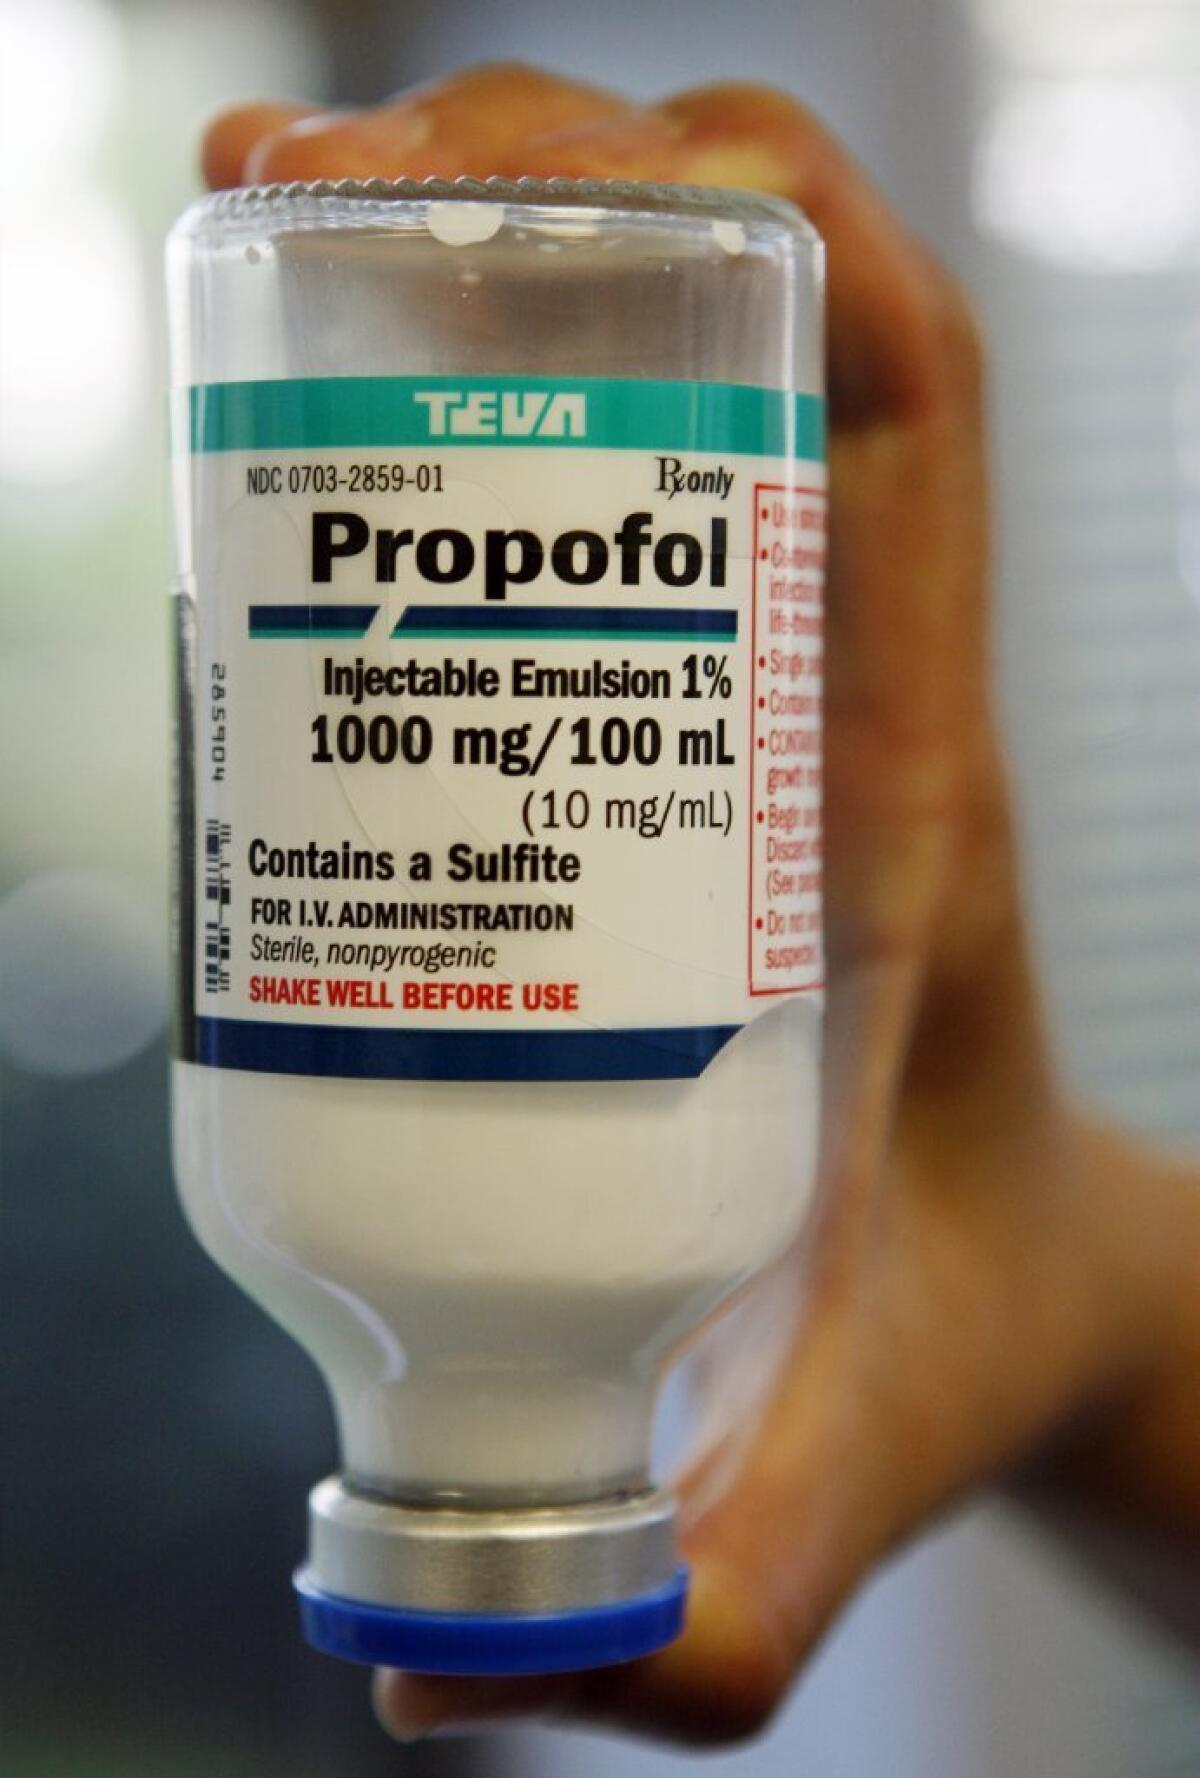 Some gastroenterologists say sedation using the powerful sedative propofol is unnecessary for colonoscopies.